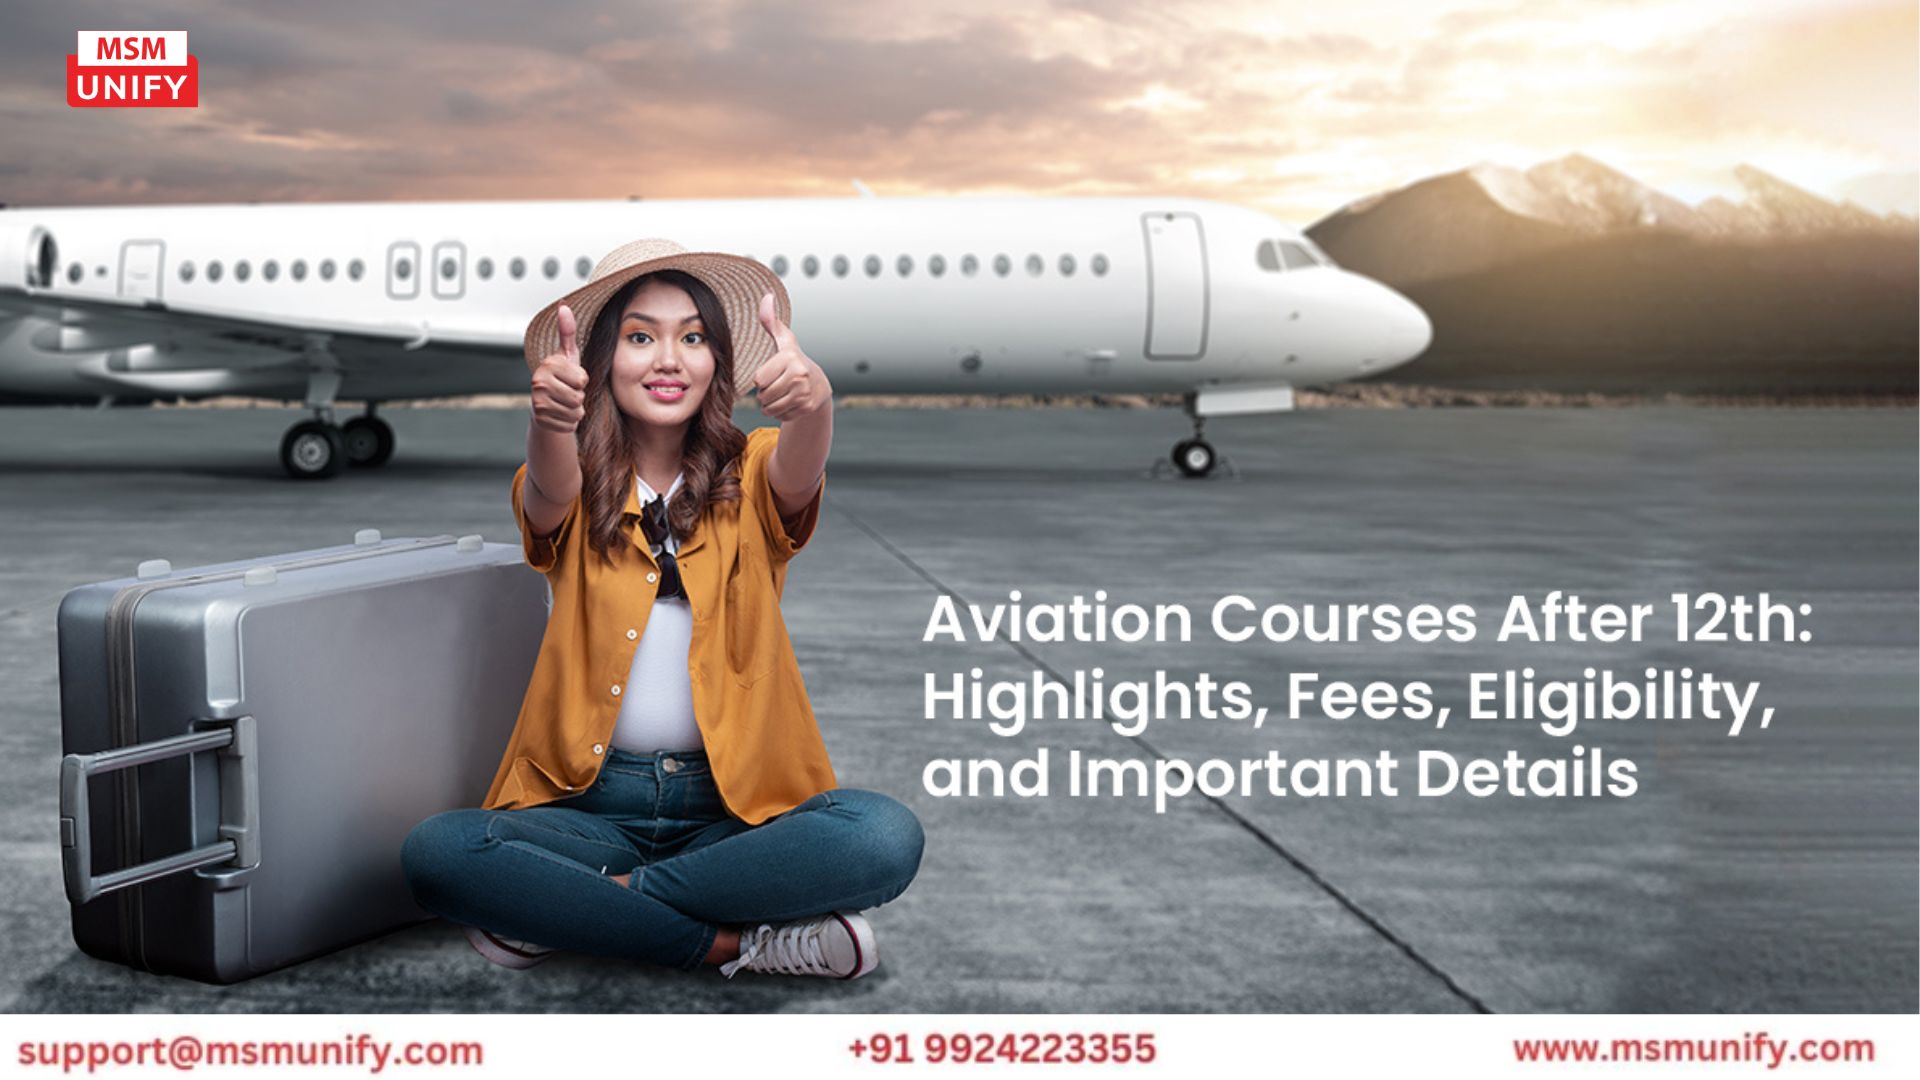 Explore high-flying possibilities with our curated list of <a href="https://www.msmunify.com/blogs/aviation-courses-after-12th/">aviation courses after 12th </a>. Elevate your career aspirations and soar into the world of aviation excellence. Find the perfect program to fuel your passion for flying and chart a course for success in the skies. Start your aviation journey today! 

